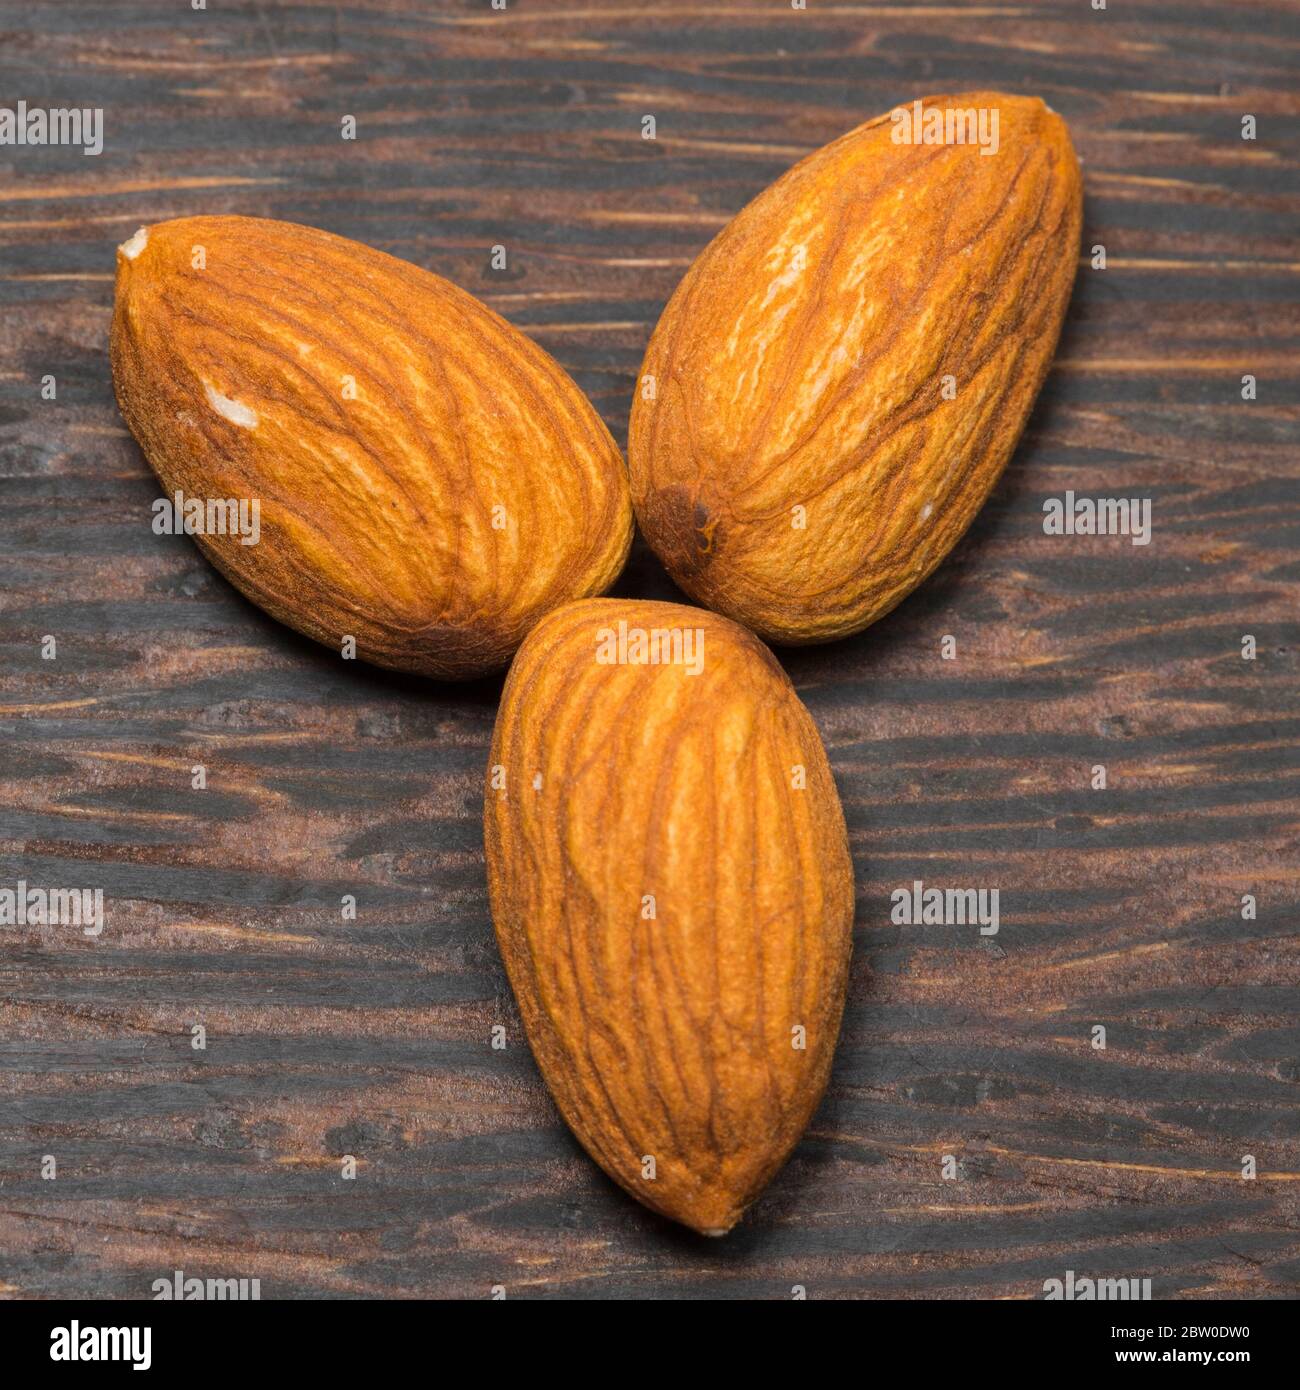 Close-up view of almonds on black wooden background. Stock Photo